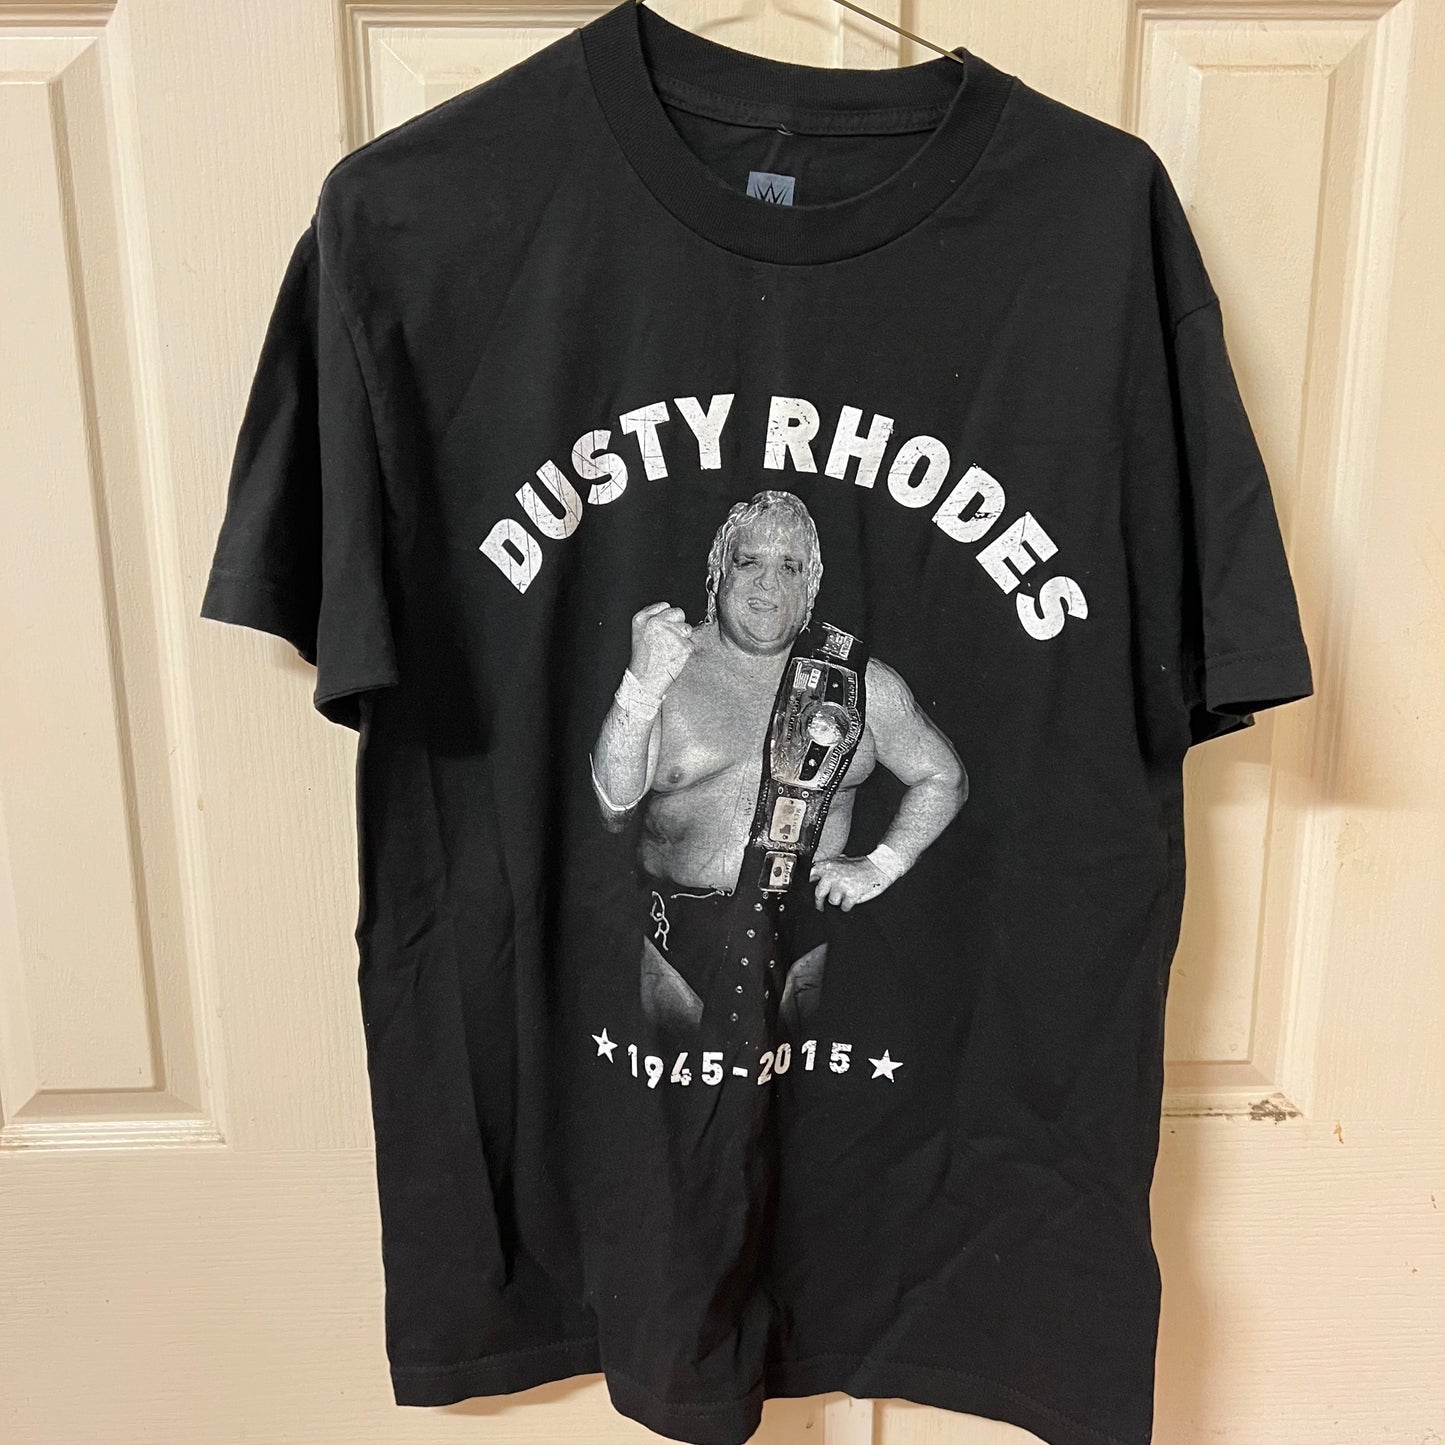 Dusty Rhodes Lives On - Medium Size - Official WWE Shirt